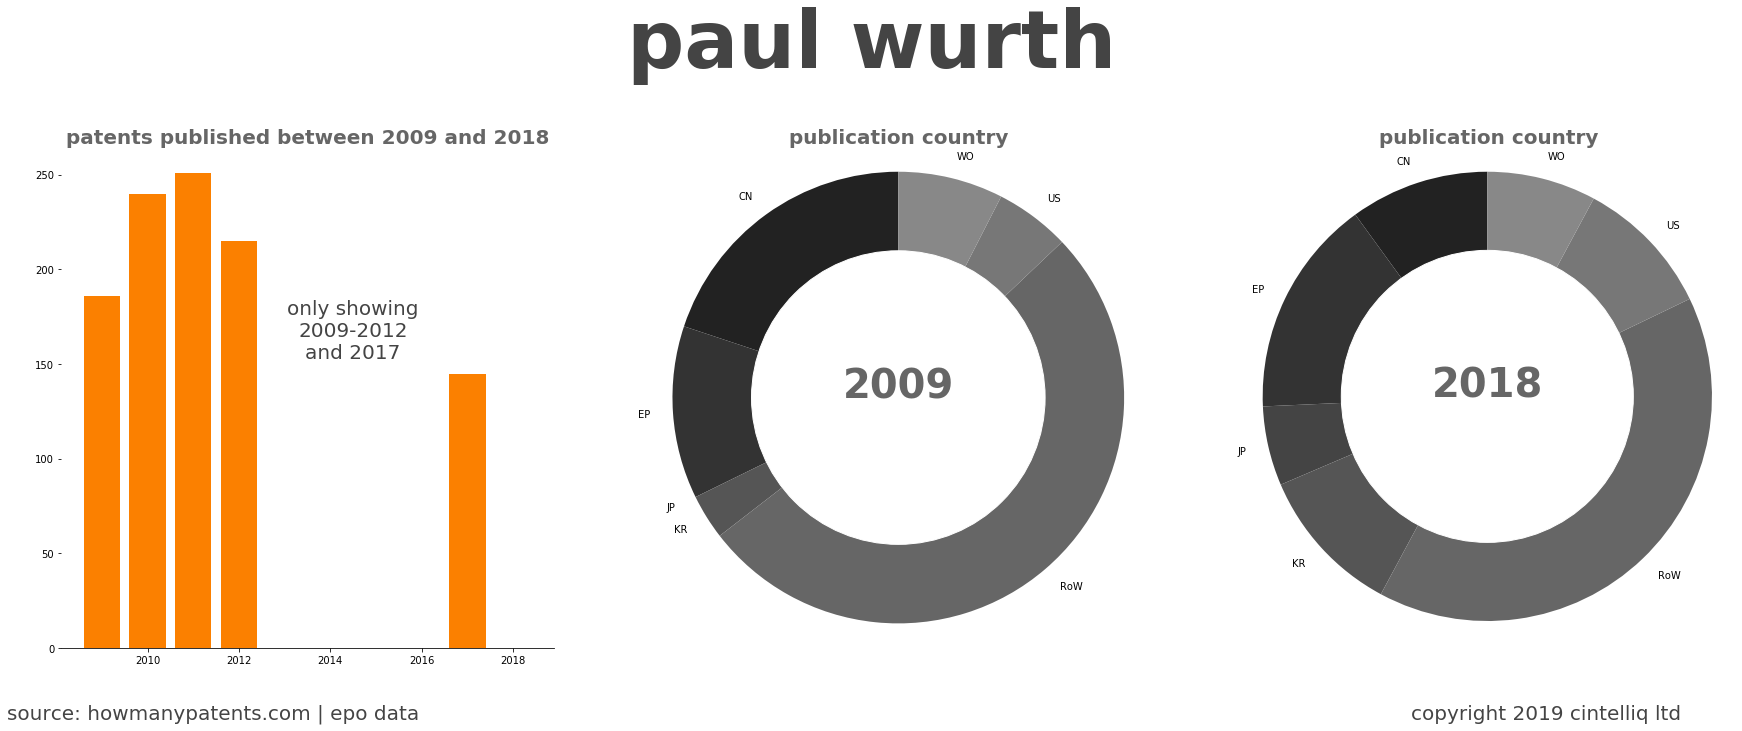 summary of patents for Paul Wurth